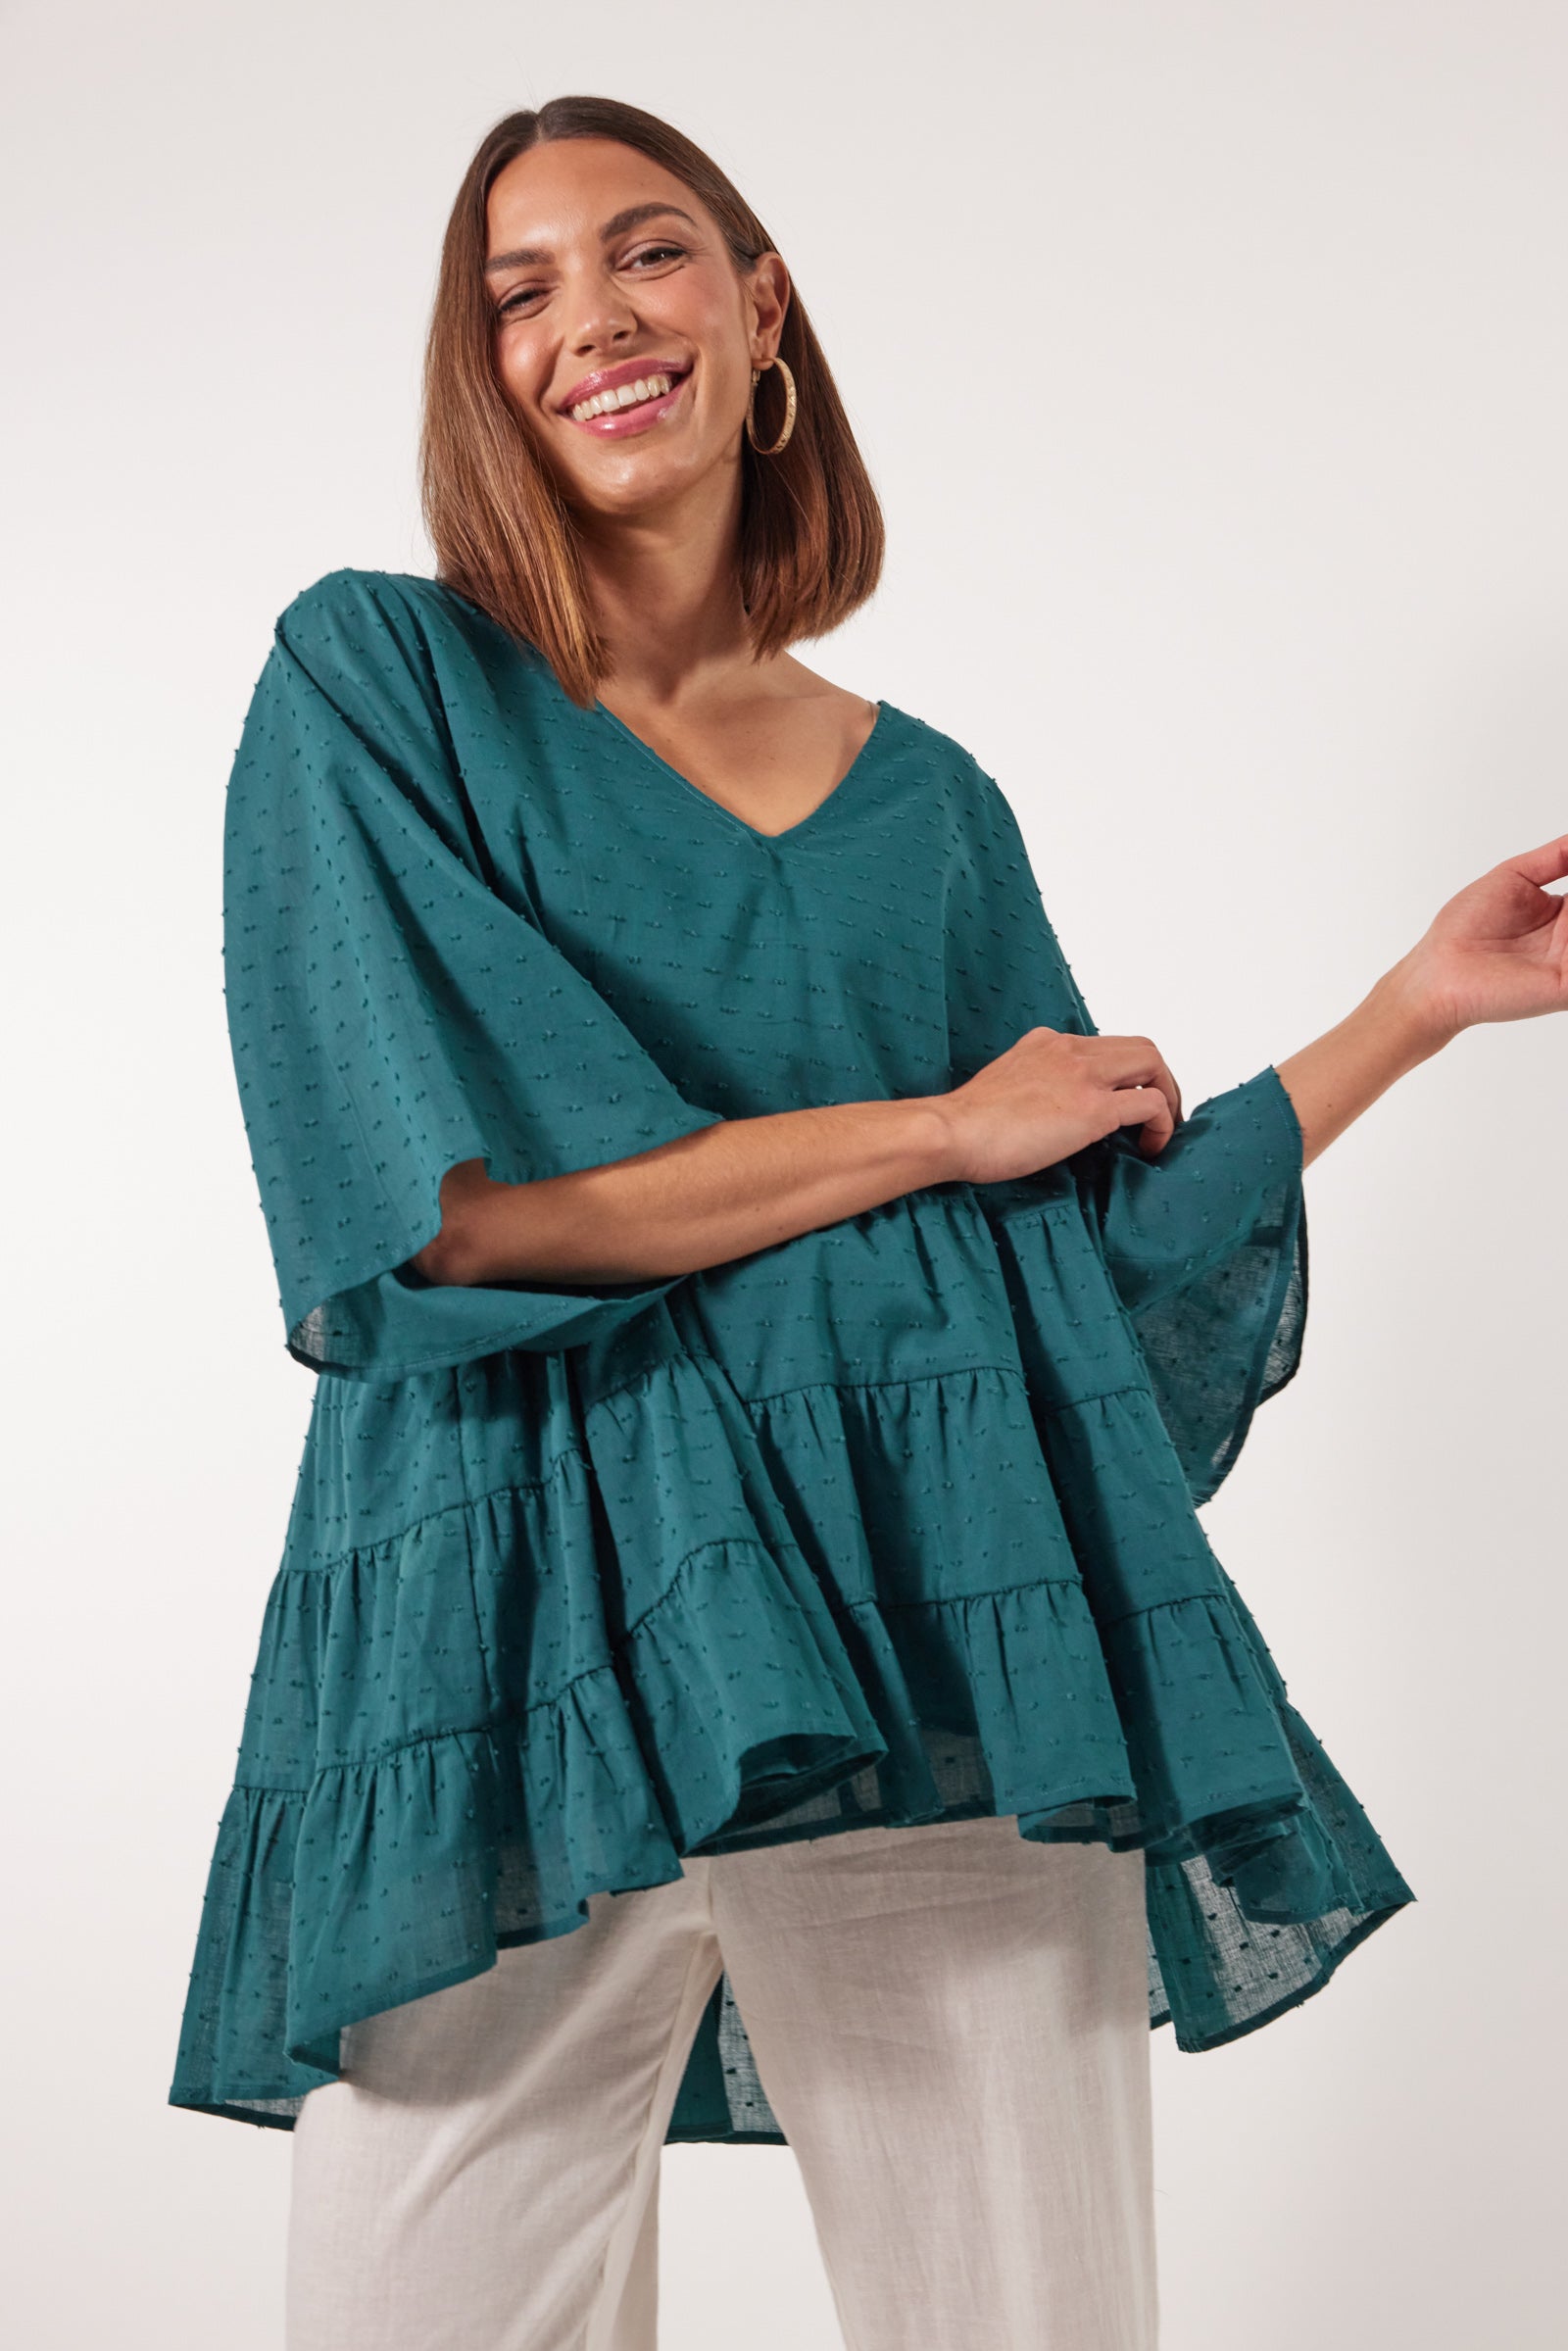 Soiree Relax Top - Teal - Isle of Mine Clothing - Top 3/4 Sleeve One Size